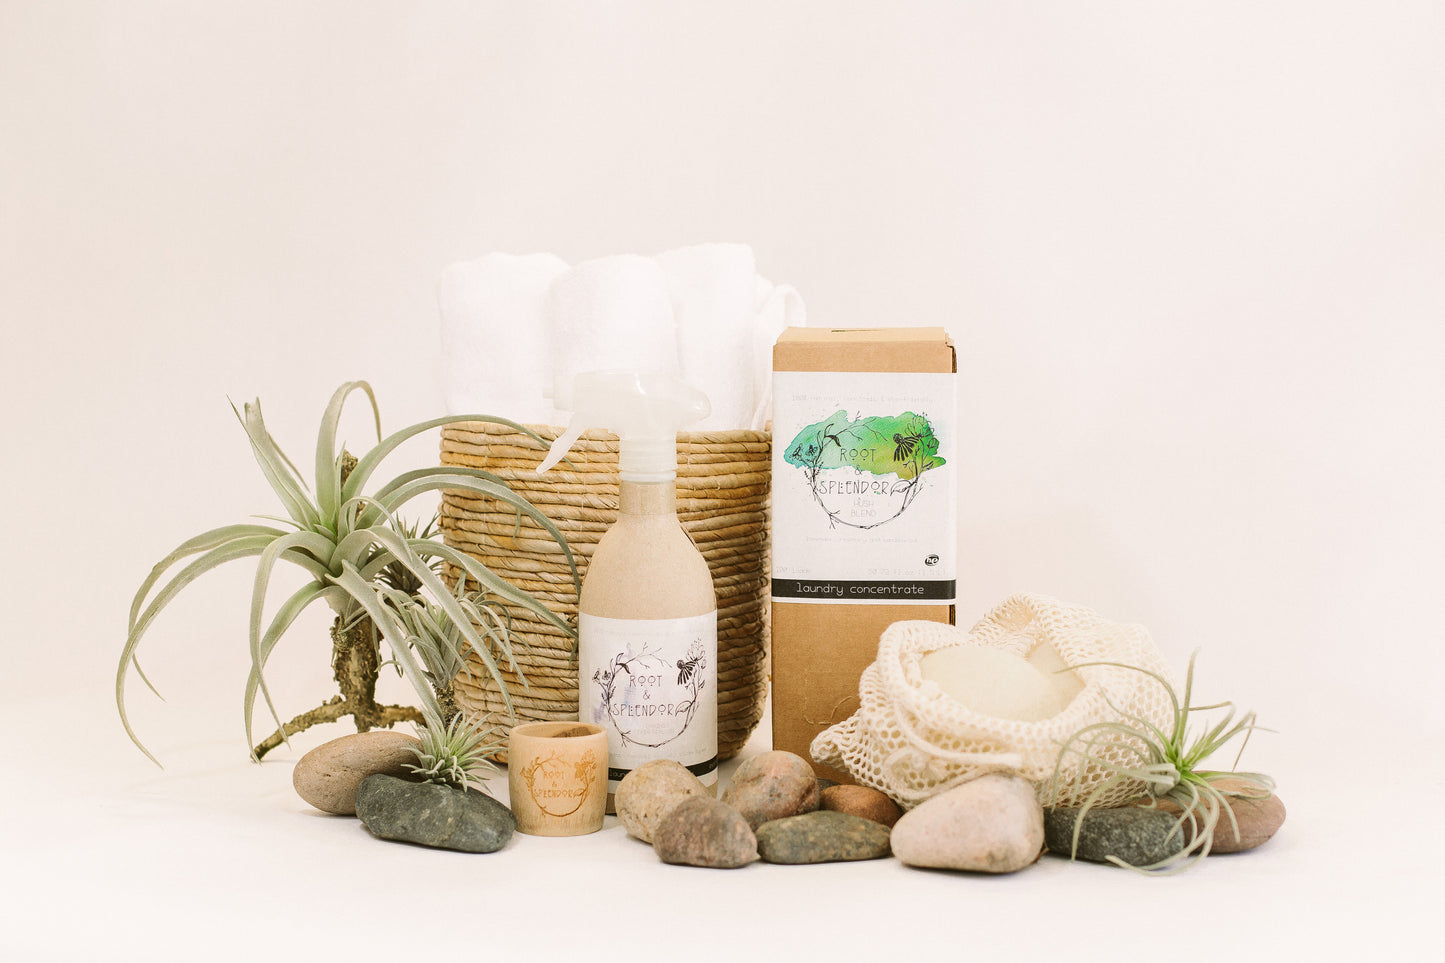 Complete Laundry Essentials Collection